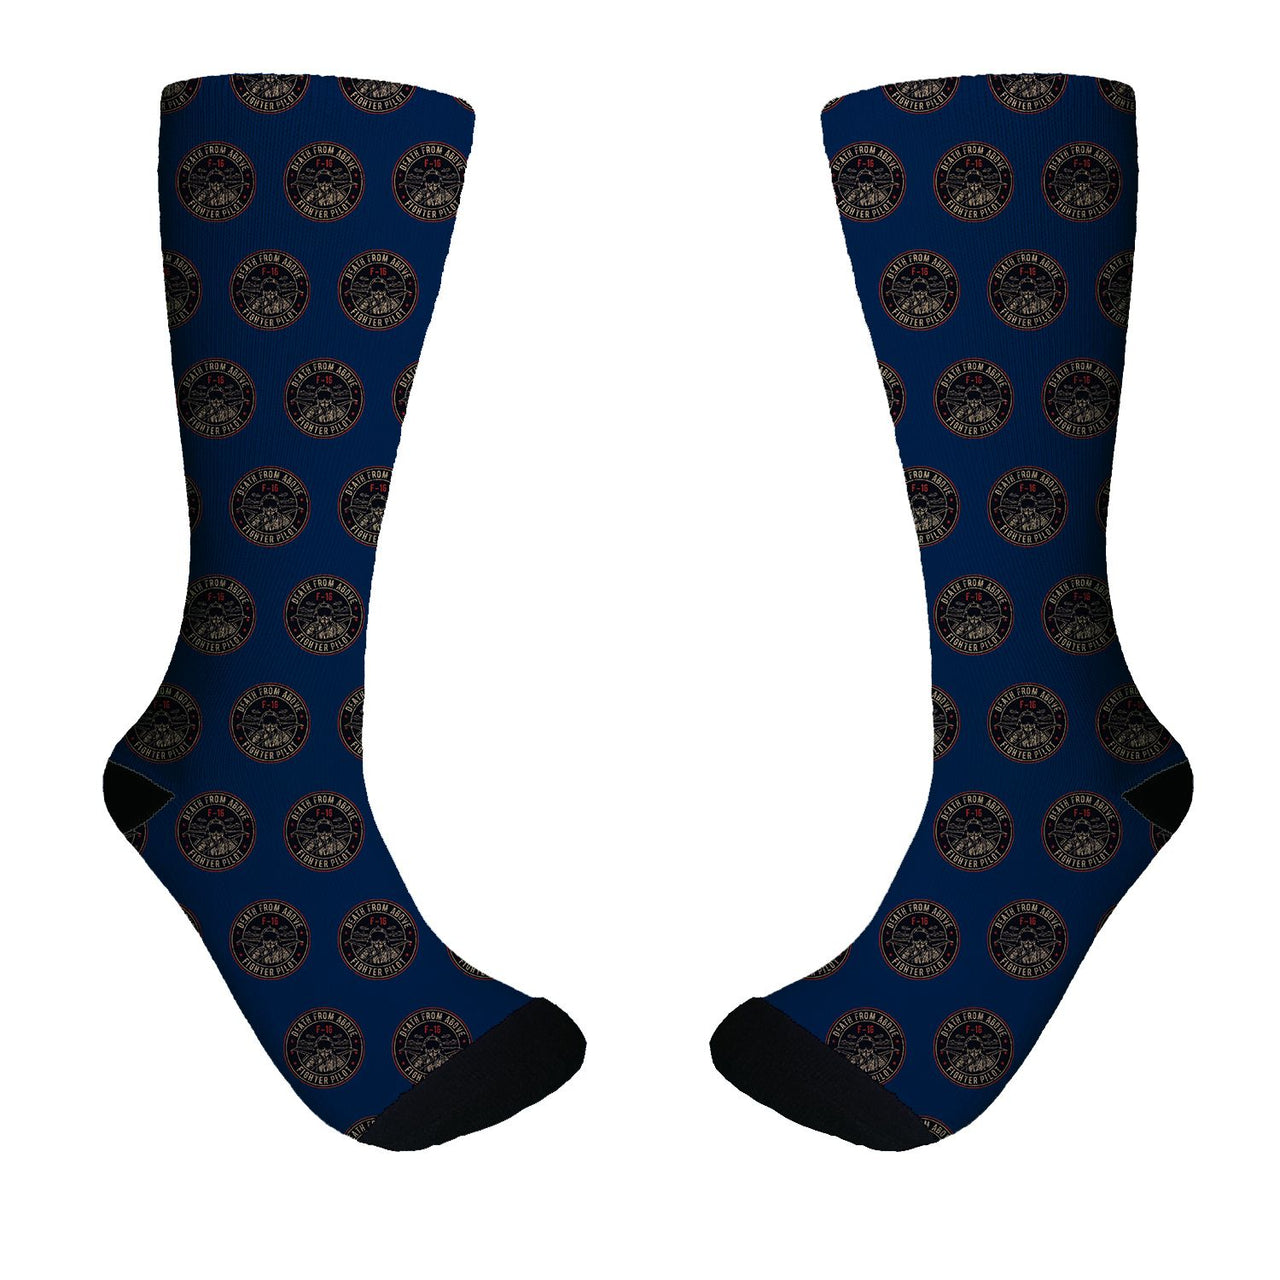 Fighting Falcon F16 - Death From Above Designed Socks